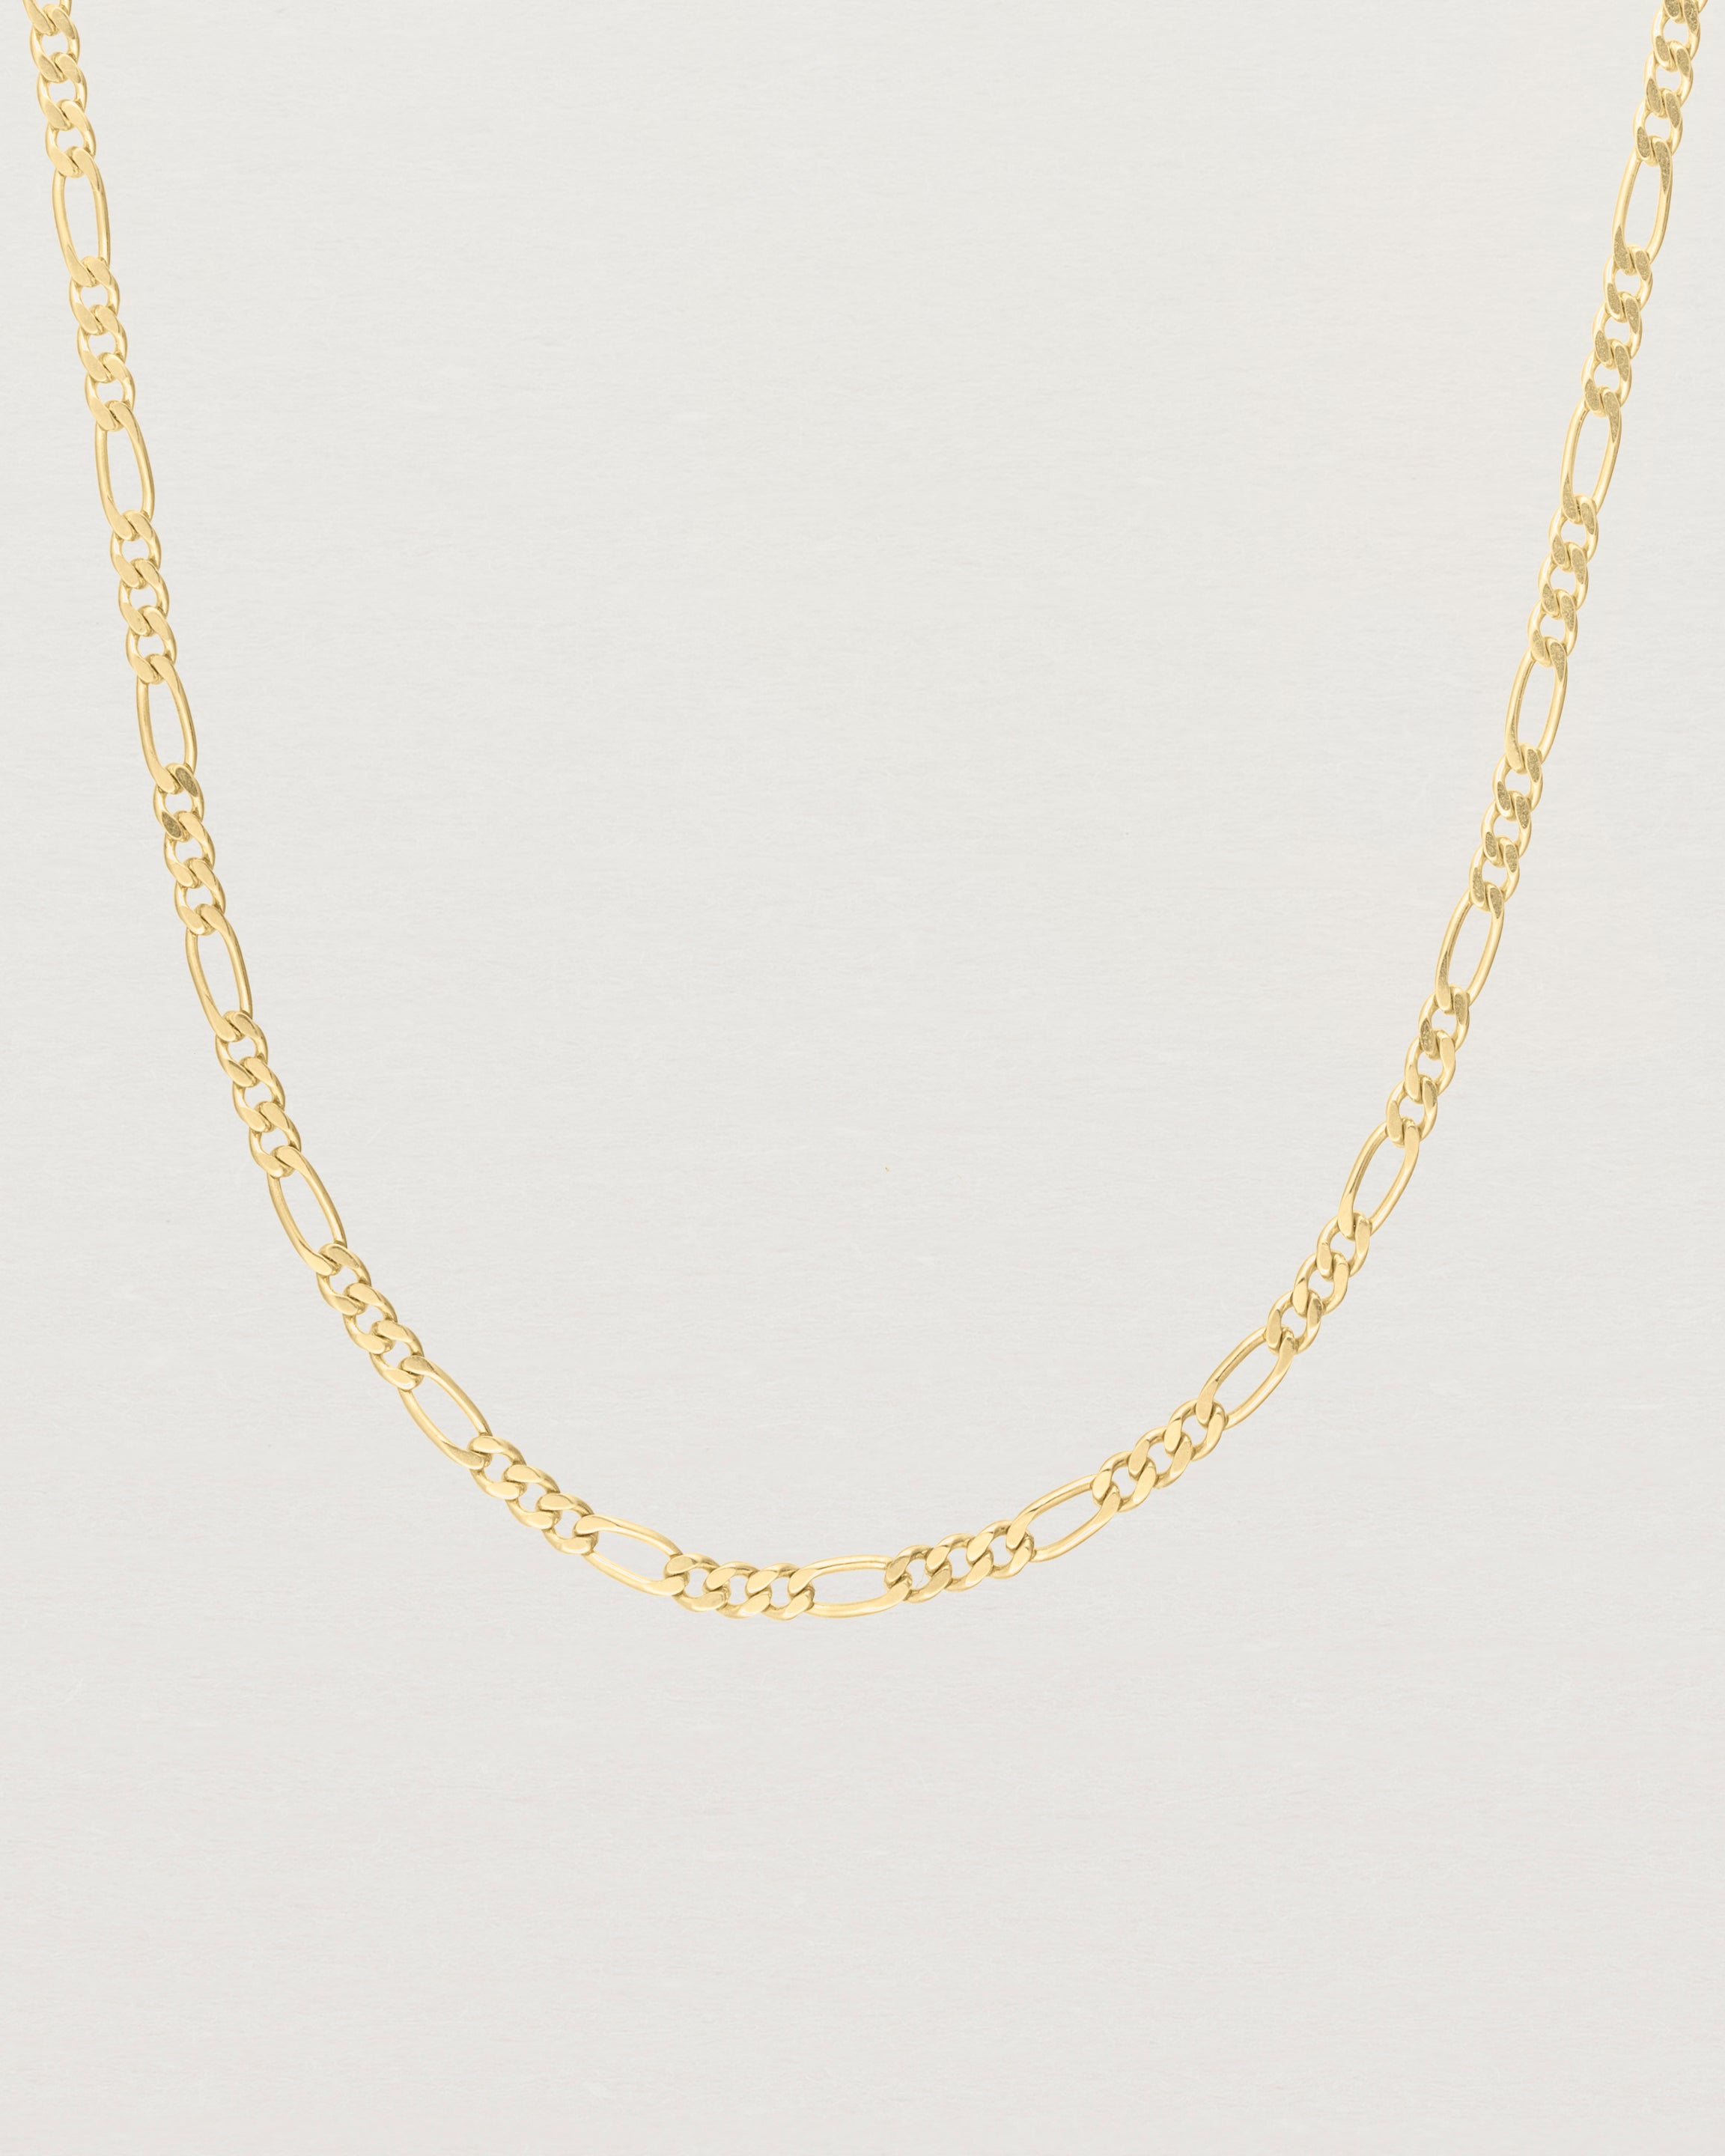 Gold 3mm Figaro Chain Necklace For Women or Men - Boutique Wear RENN